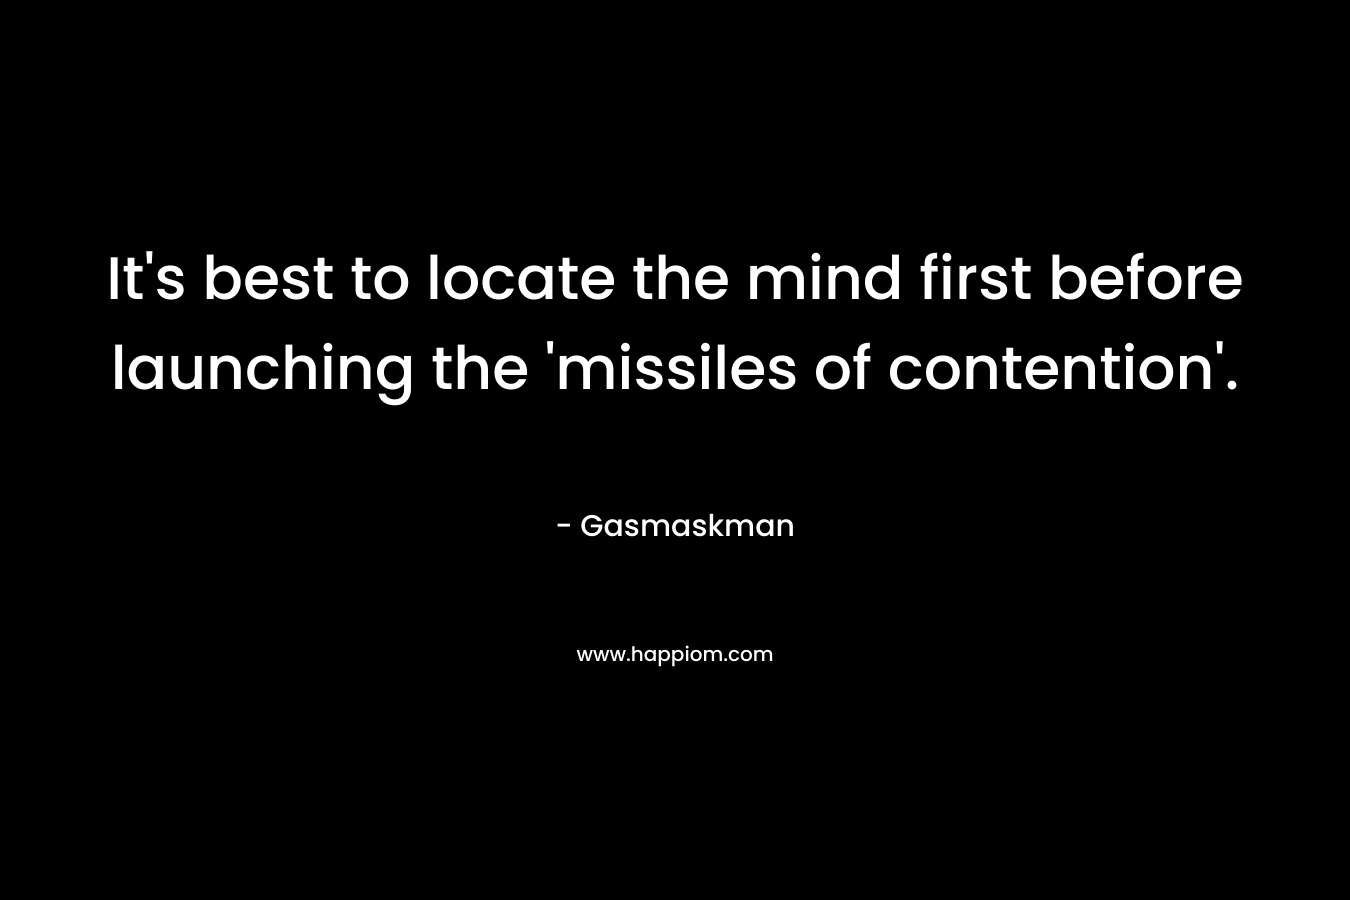 It’s best to locate the mind first before launching the ‘missiles of contention’. – Gasmaskman